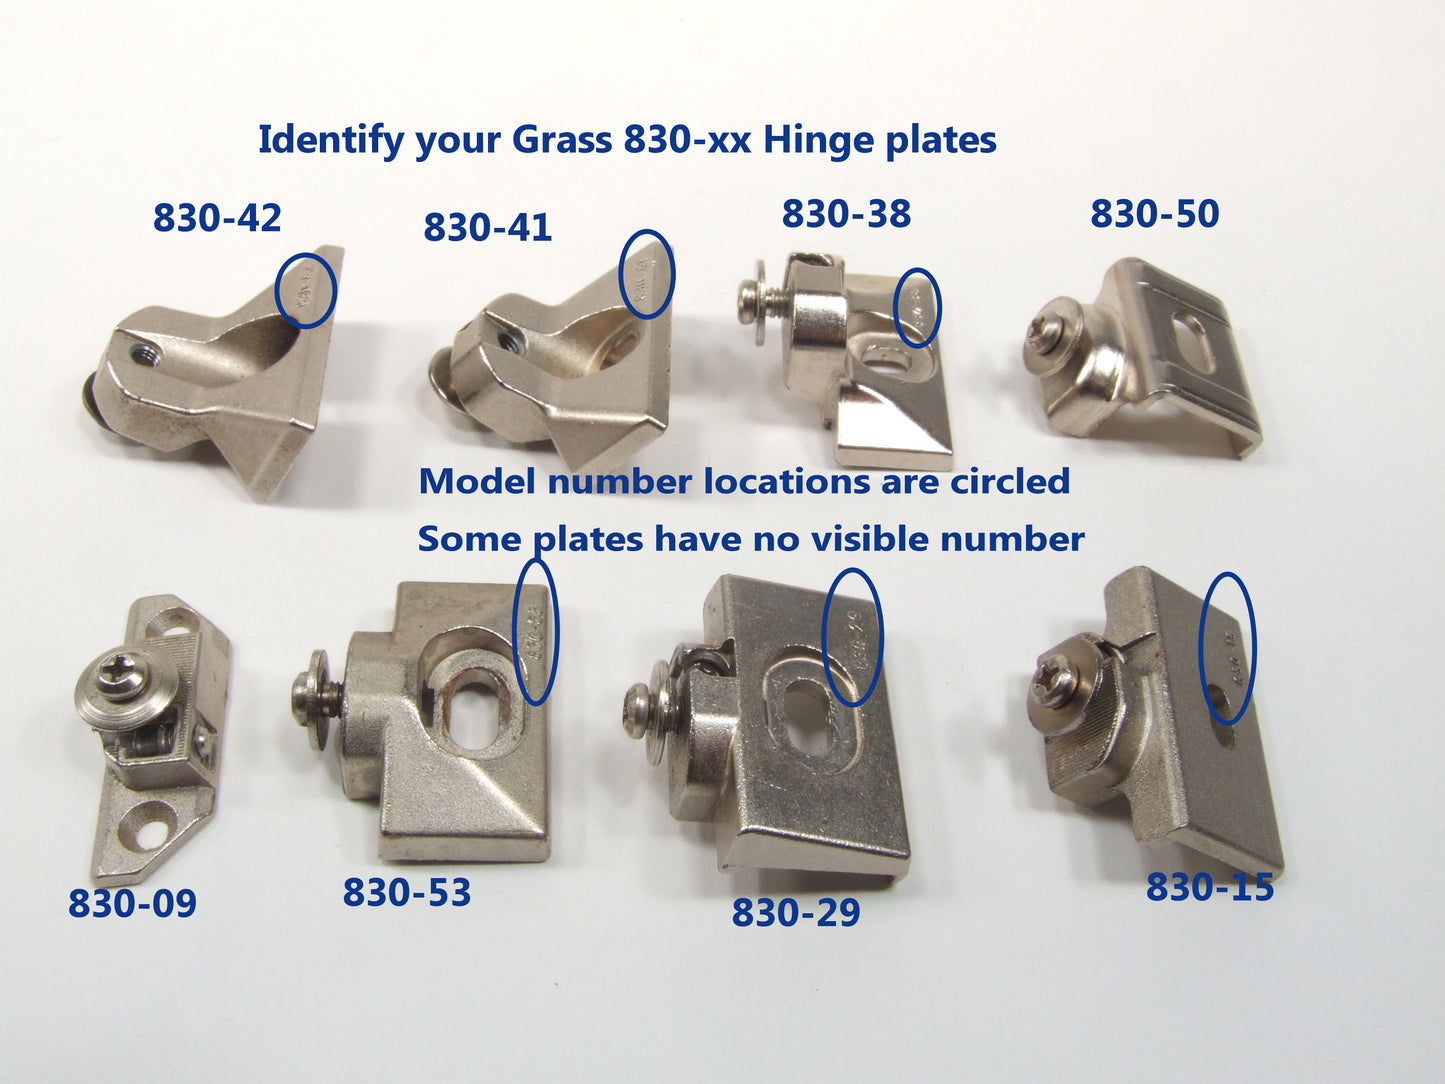 Grass 830-13 Soft Close Replacement Hinges - Sold as PAIRS!